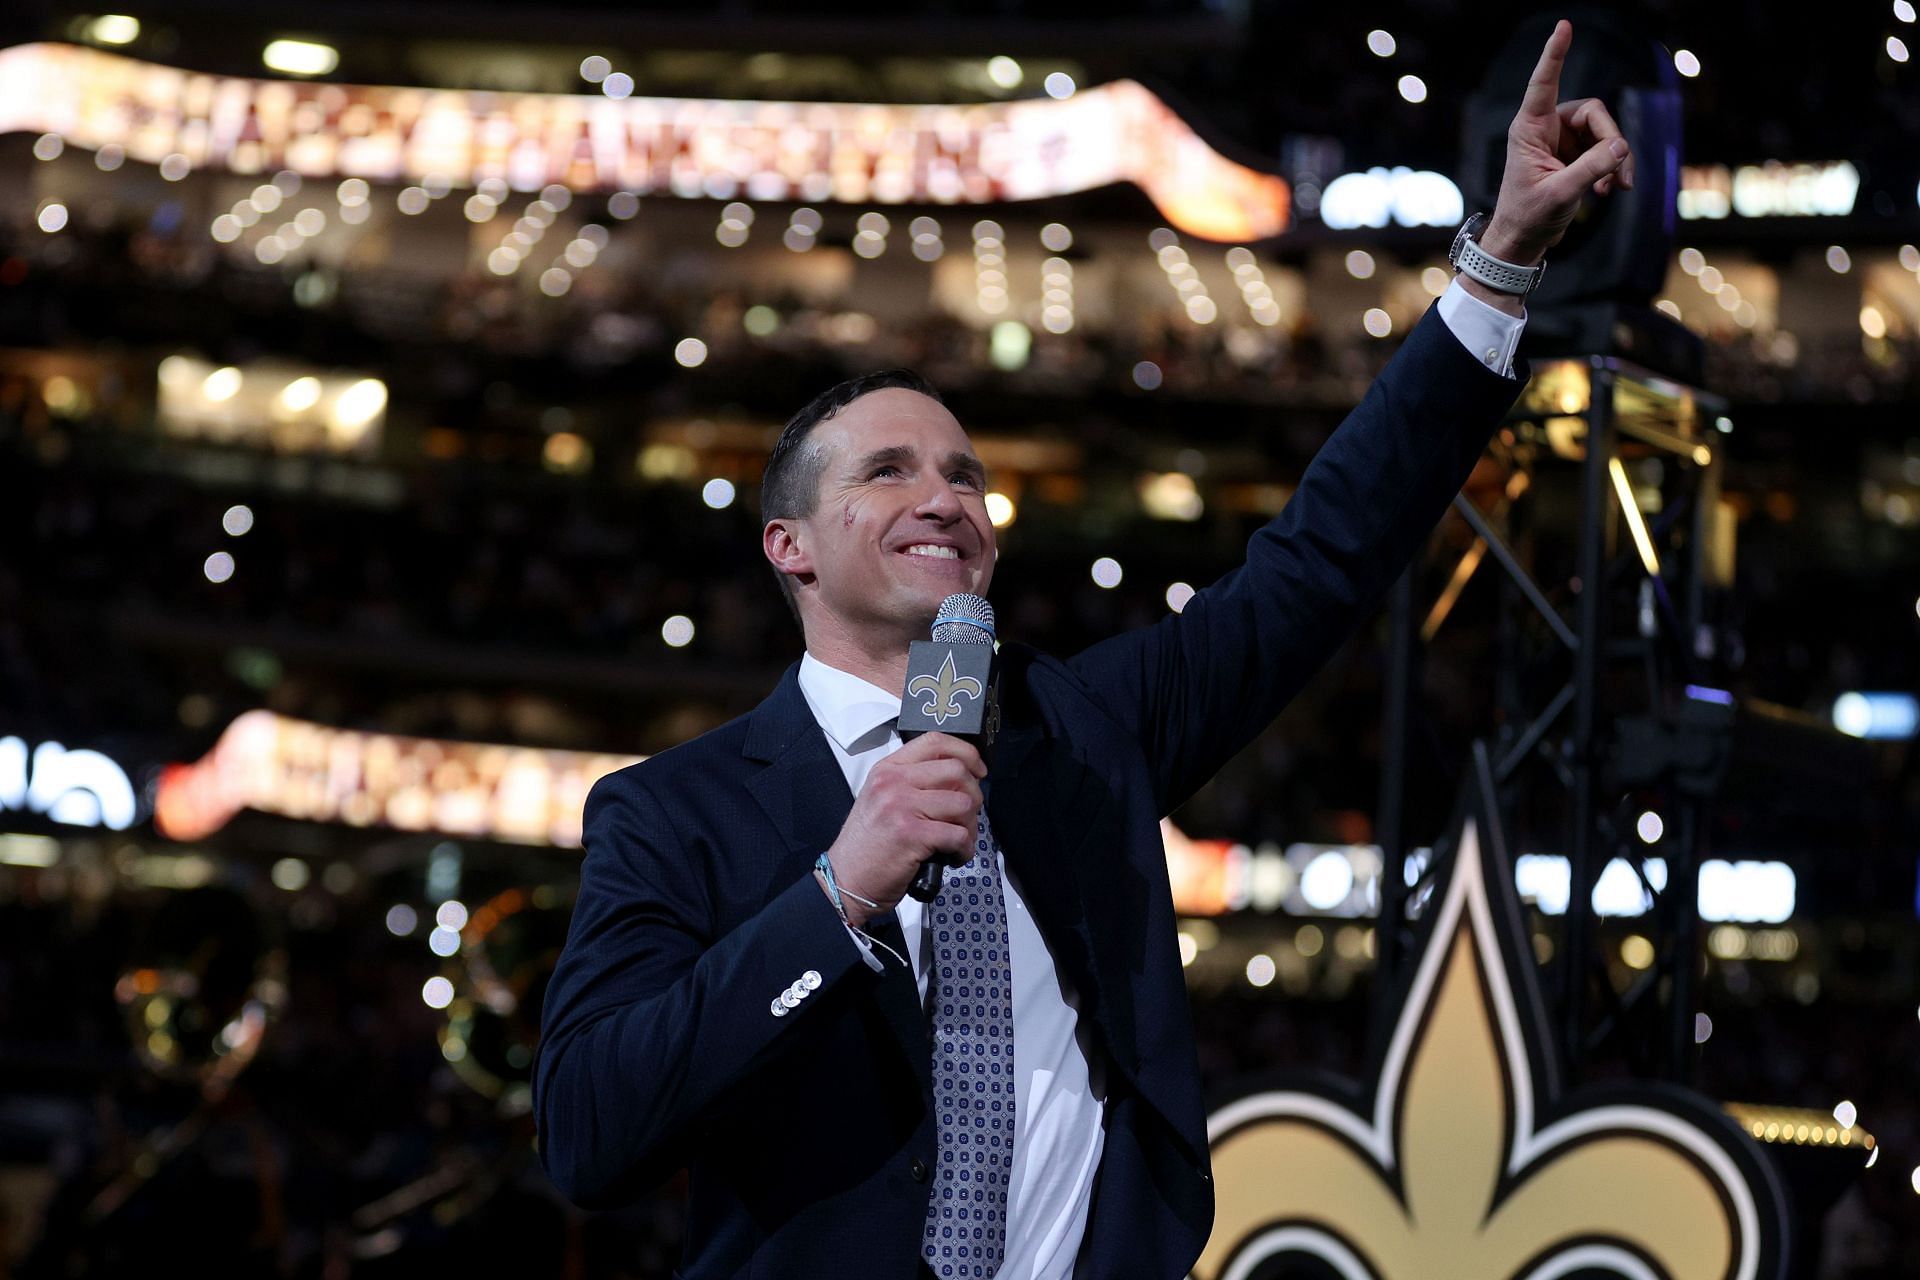 Purdue football makes huge NIL move with Drew Brees